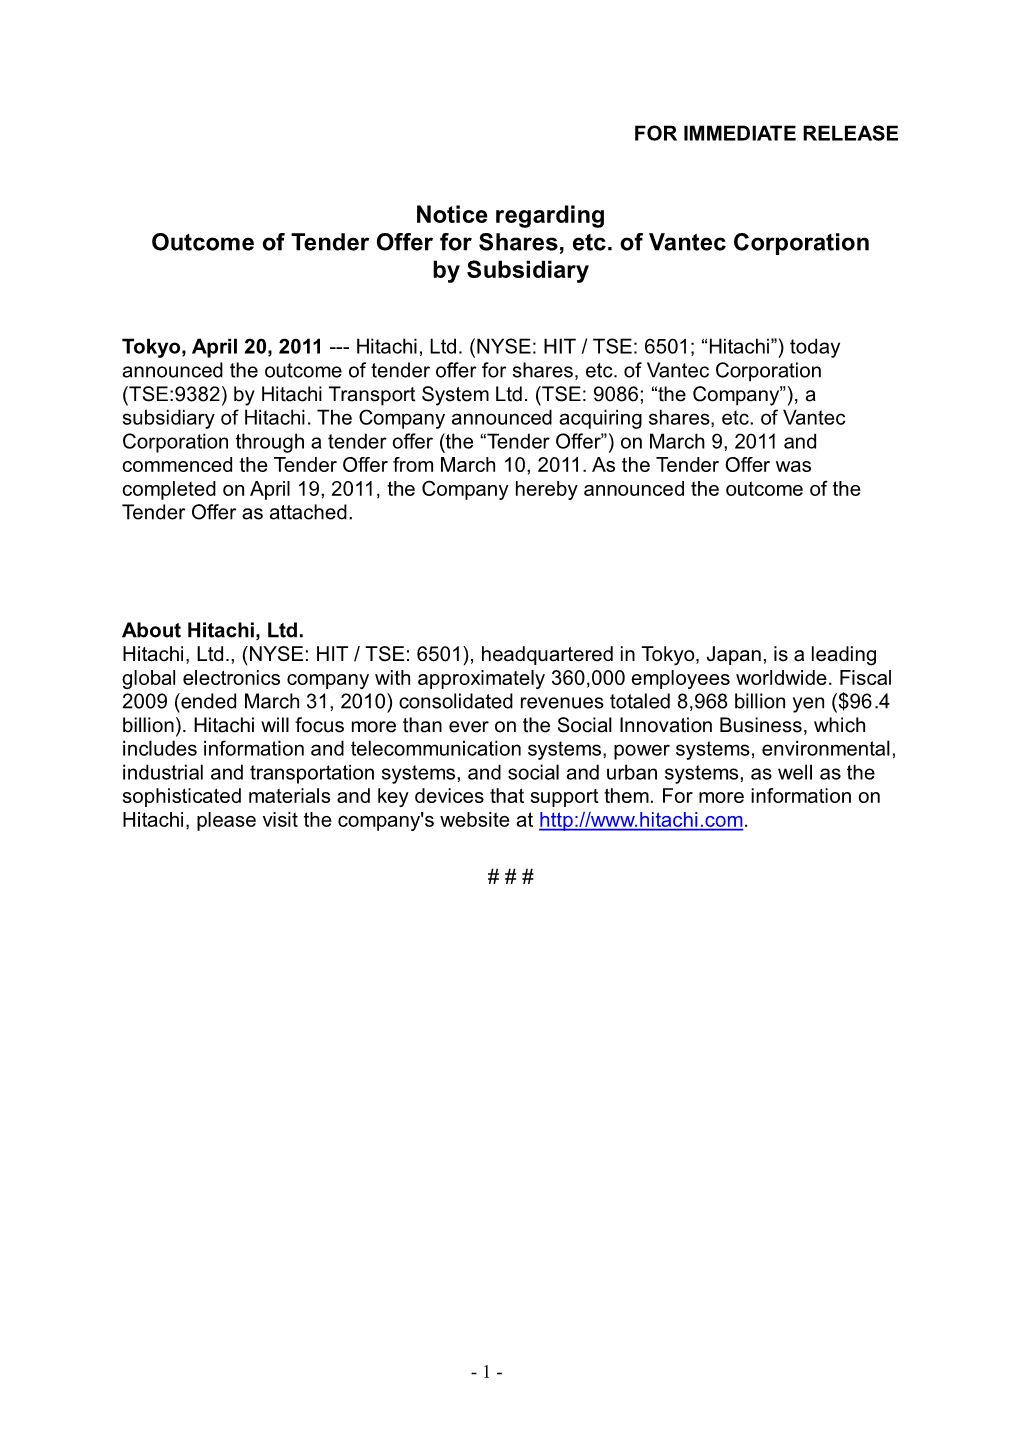 Notice Regarding Outcome of Tender Offer for Shares, Etc. of Vantec Corporation by Subsidiary